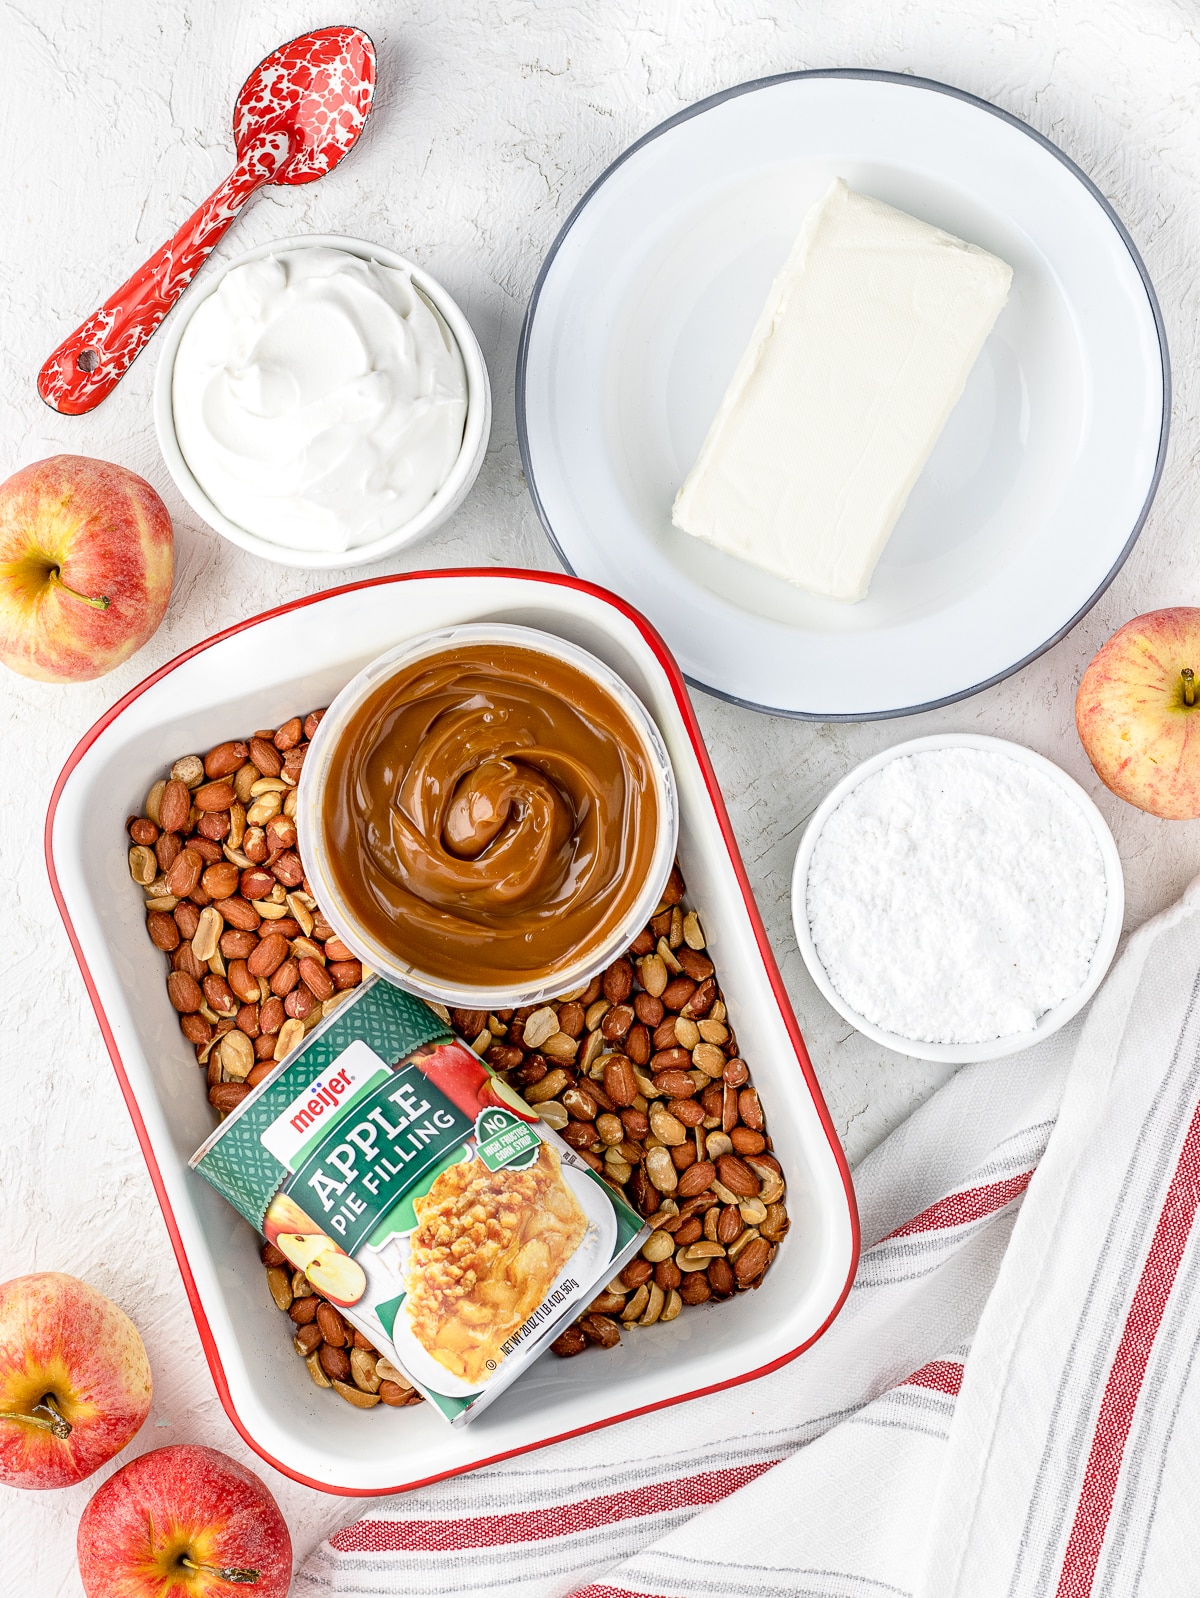 Ingredients: Cream cheese, whipped cream, powdered sugar, apple pie filling, caramel, and peanuts.